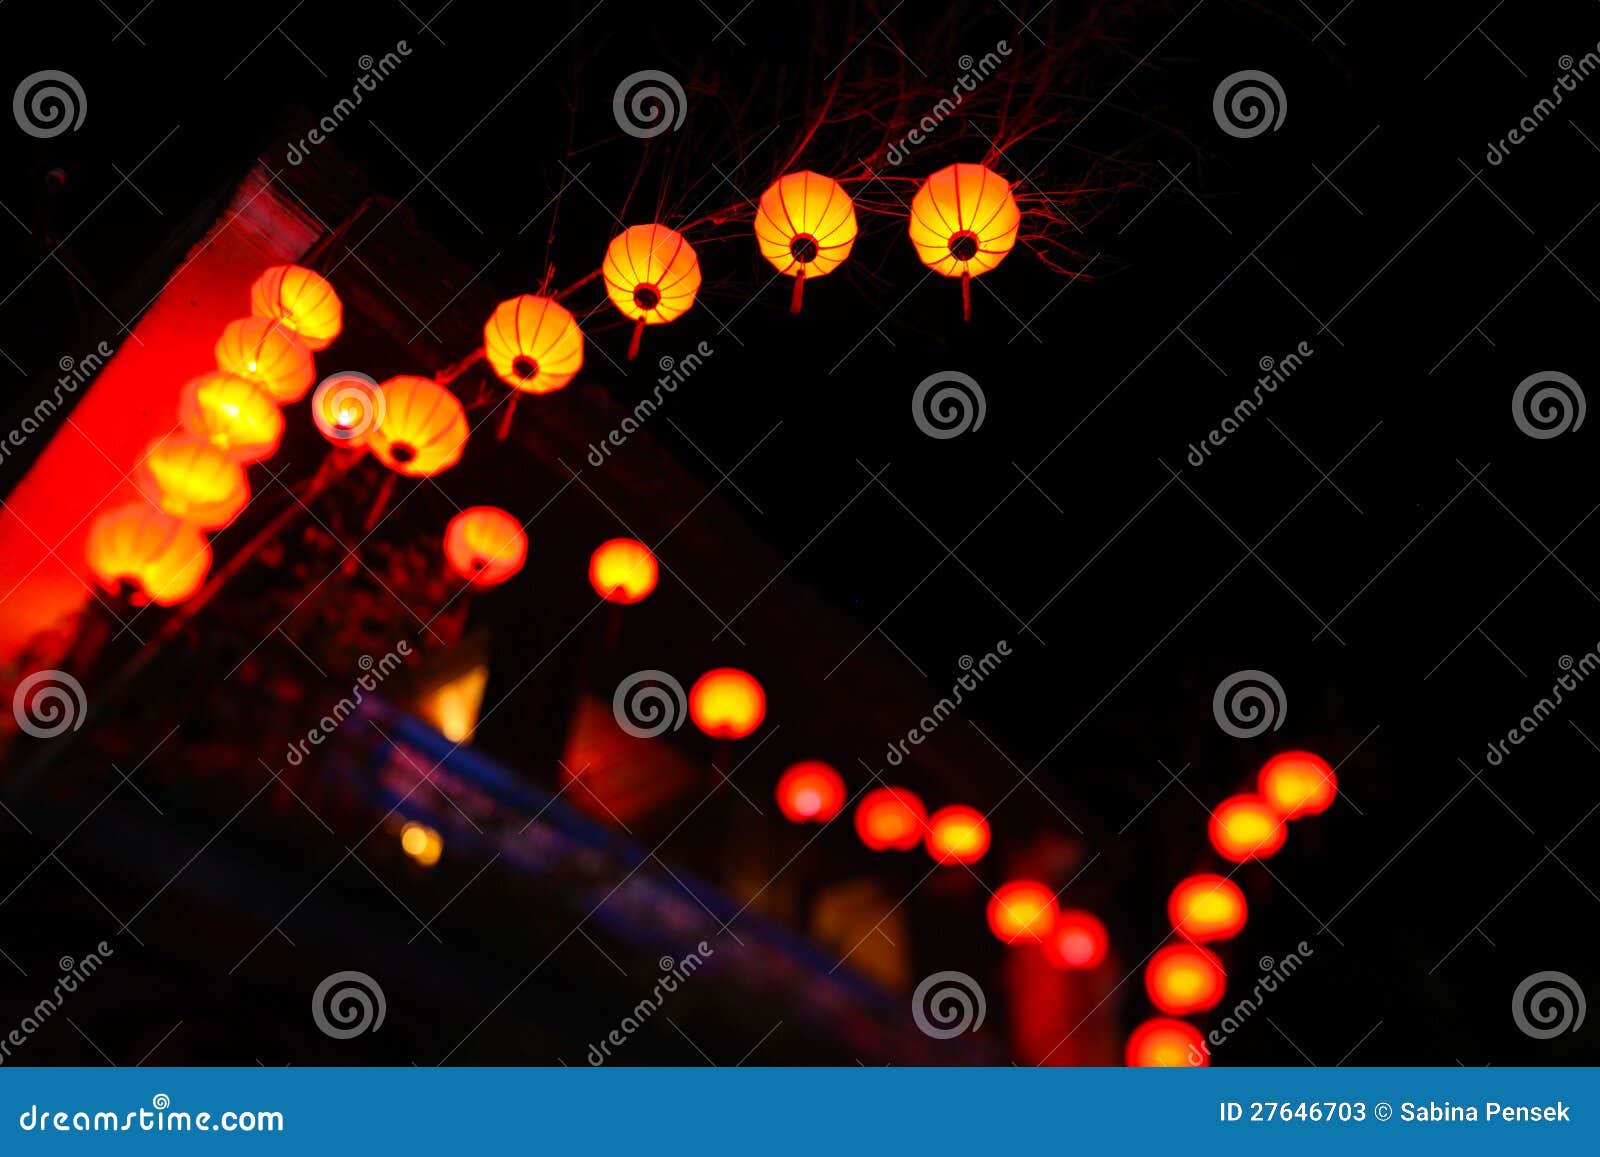 lanterns during new year celebrations in china